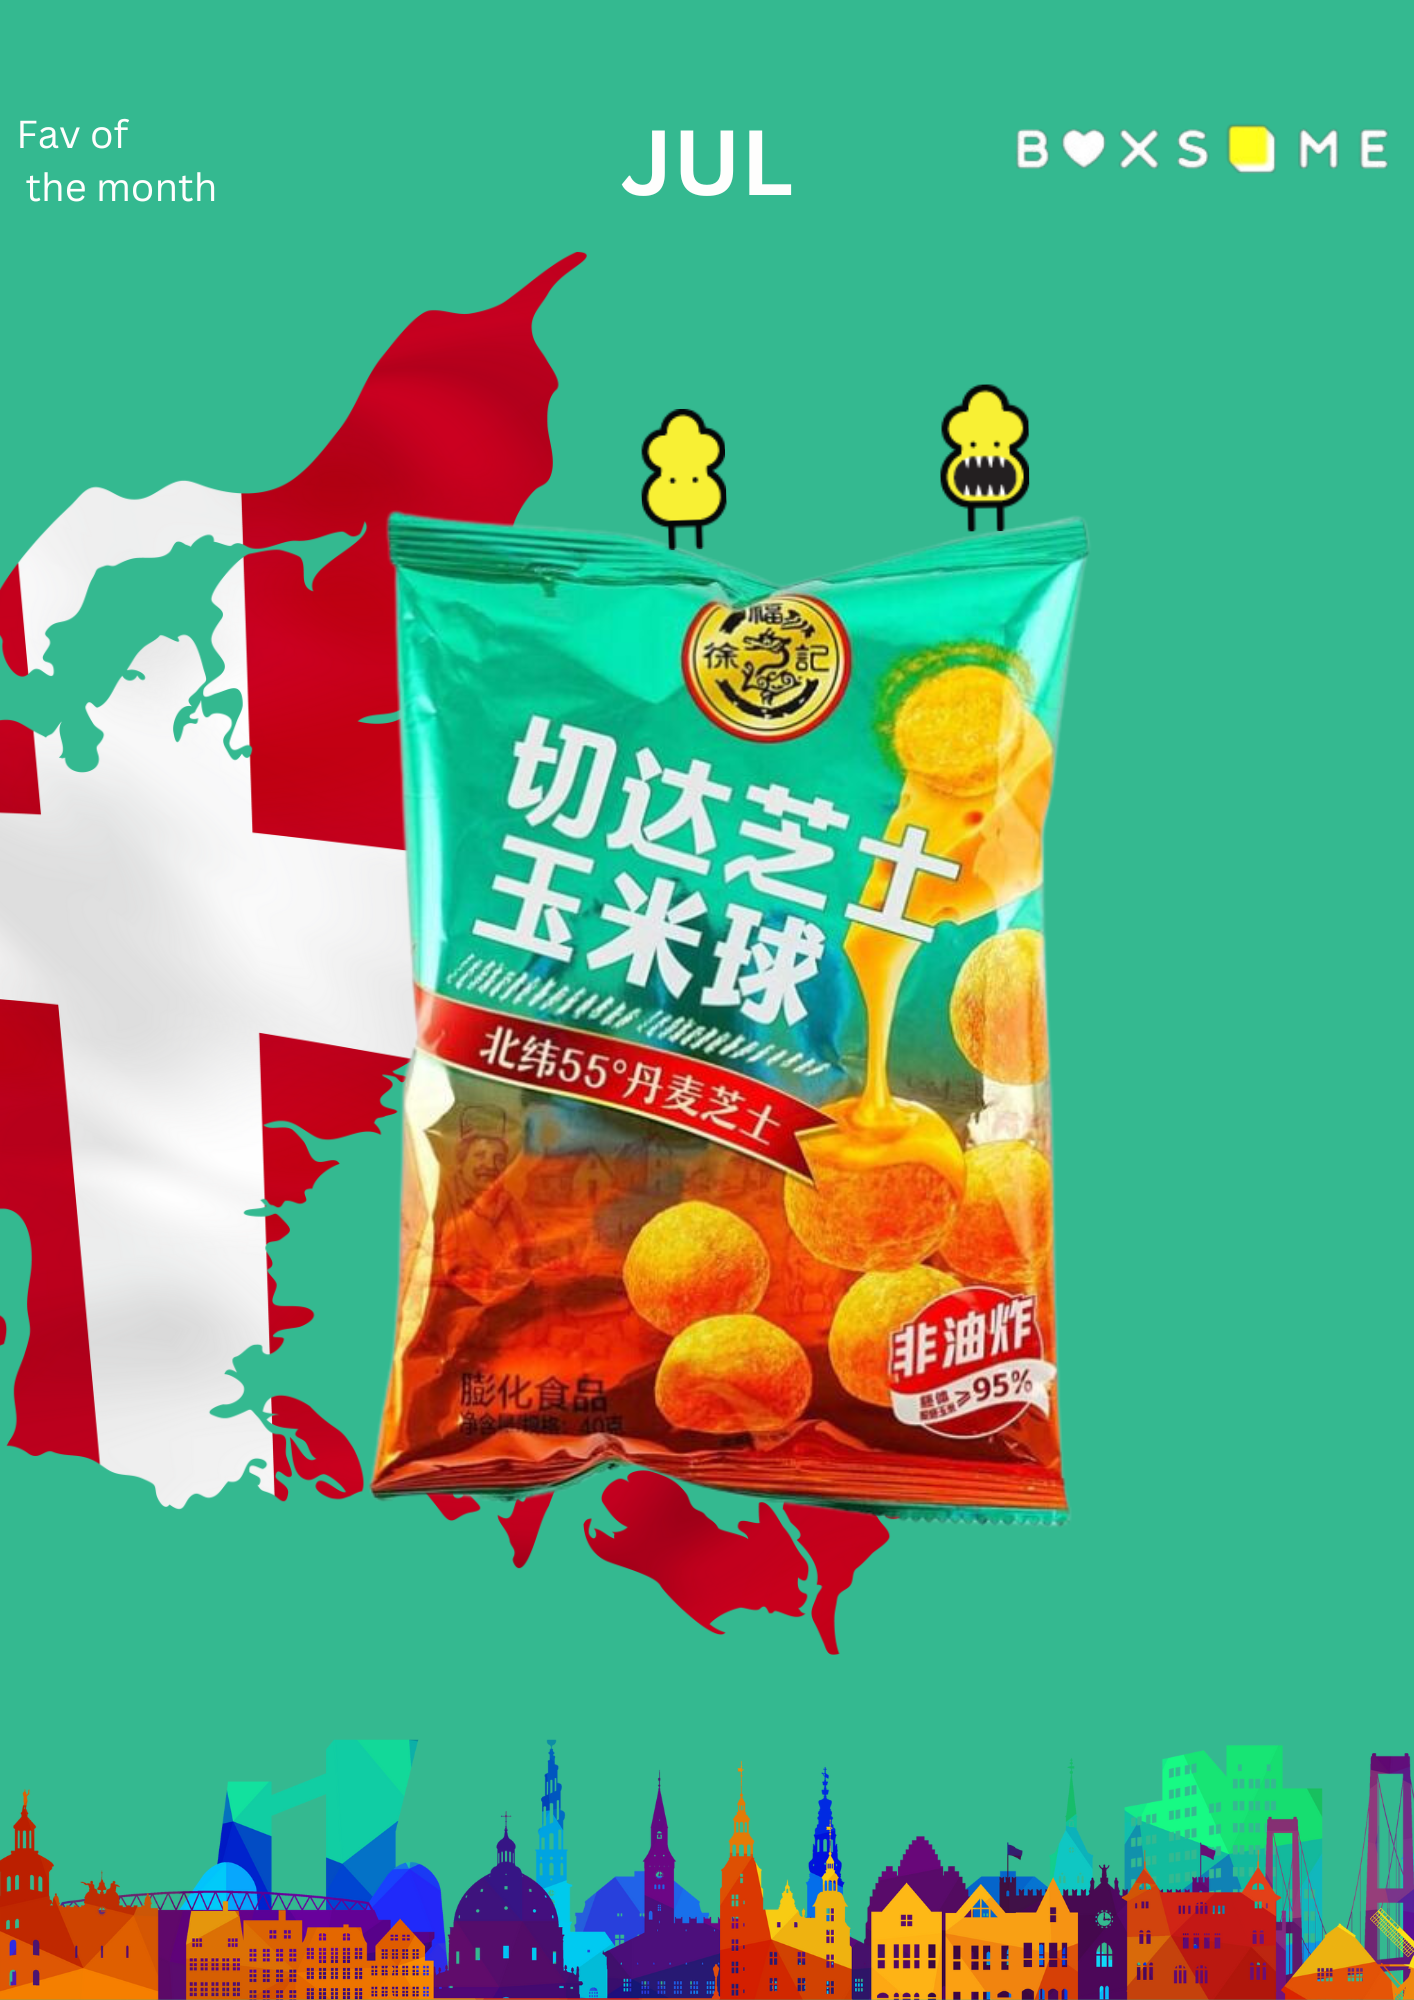 Get ready to munch on the ultimate cheesy delight with Cheddar Cheese Corn Balls! Made with premium cheese imported from Denmark 🇩🇰, these snacks deliver an irresistibly rich and savory flavor 🧀. They’re a healthier choice with 0 trans fatty acids ❌ and are not fried 🍲, ensuring you enjoy a light and crispy texture without the guilt. Perfect for sharing or snacking solo, Cheddar Cheese Corn Balls are a delicious treat that brings gourmet quality to your everyday snacking. 🧀🌽✨